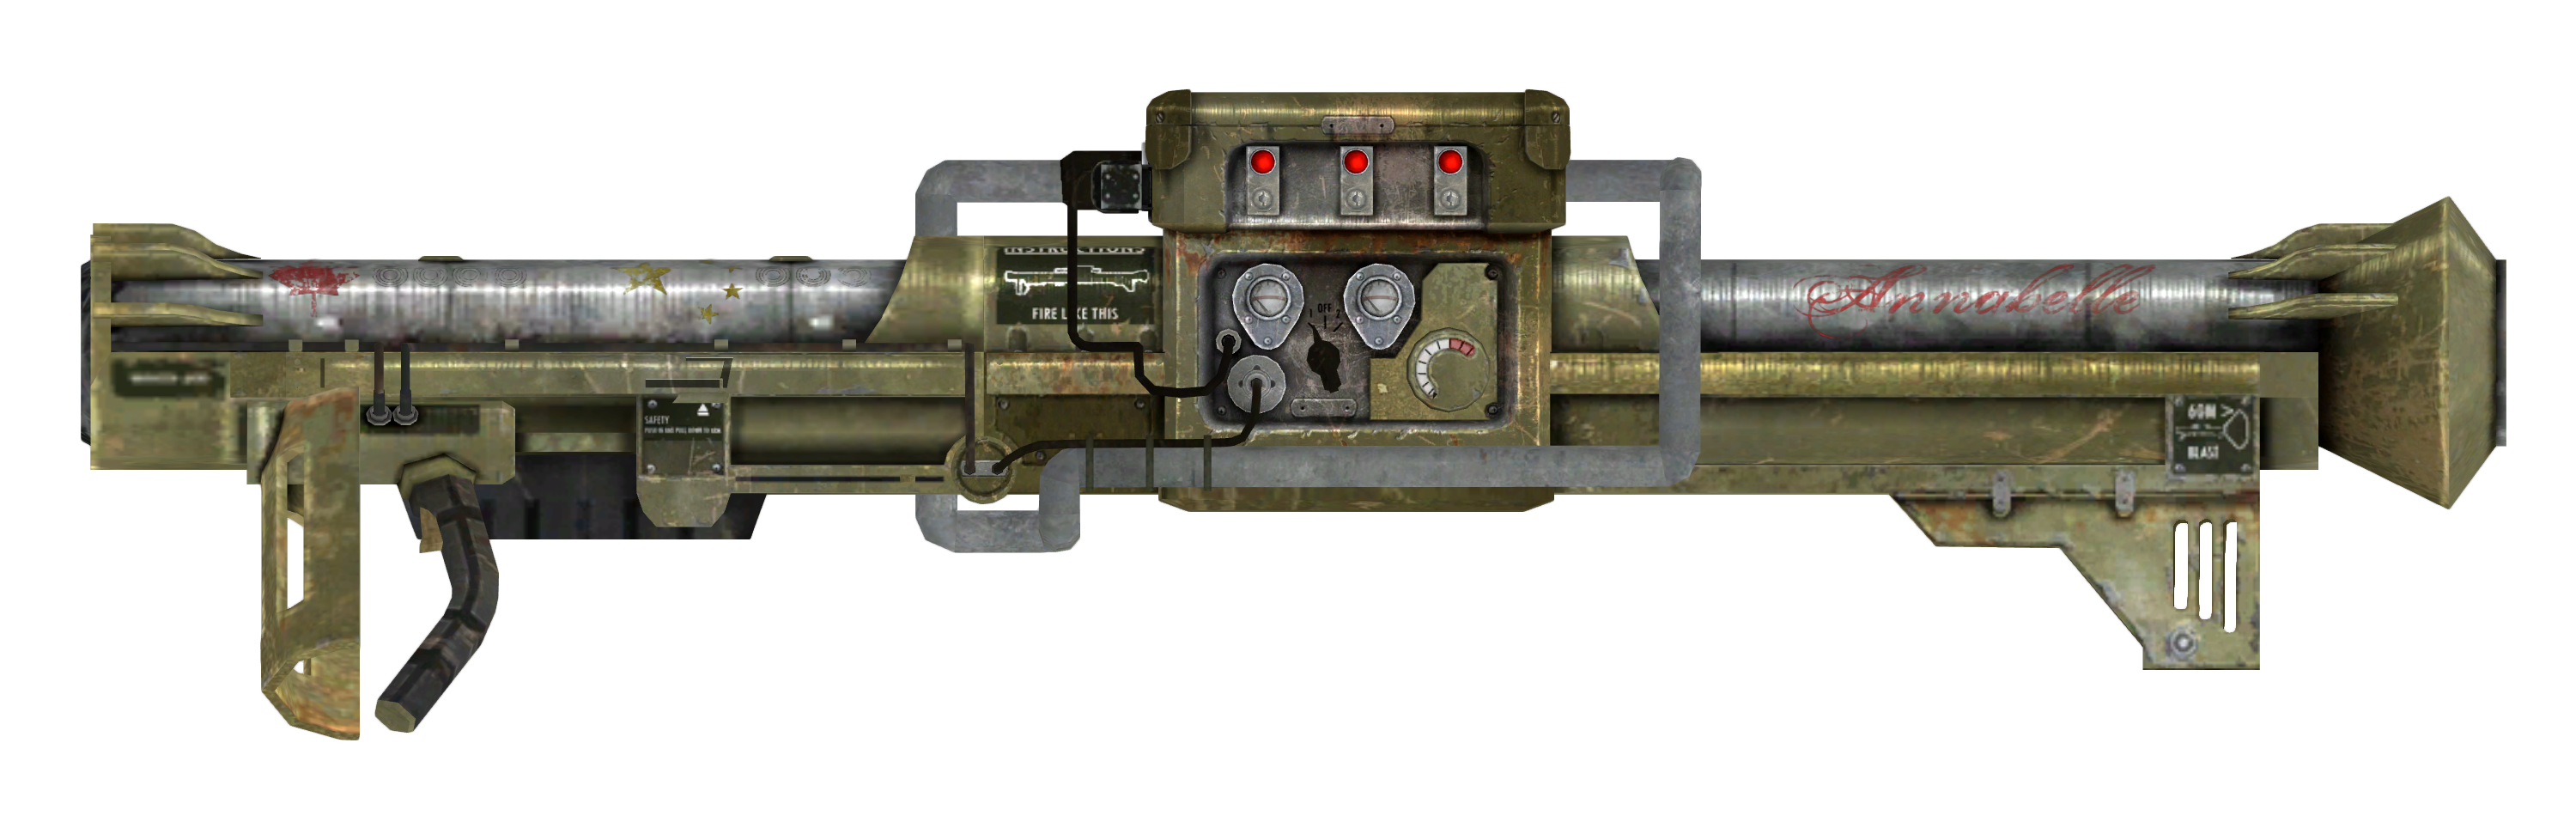 Missile launcher, Fallout Wiki